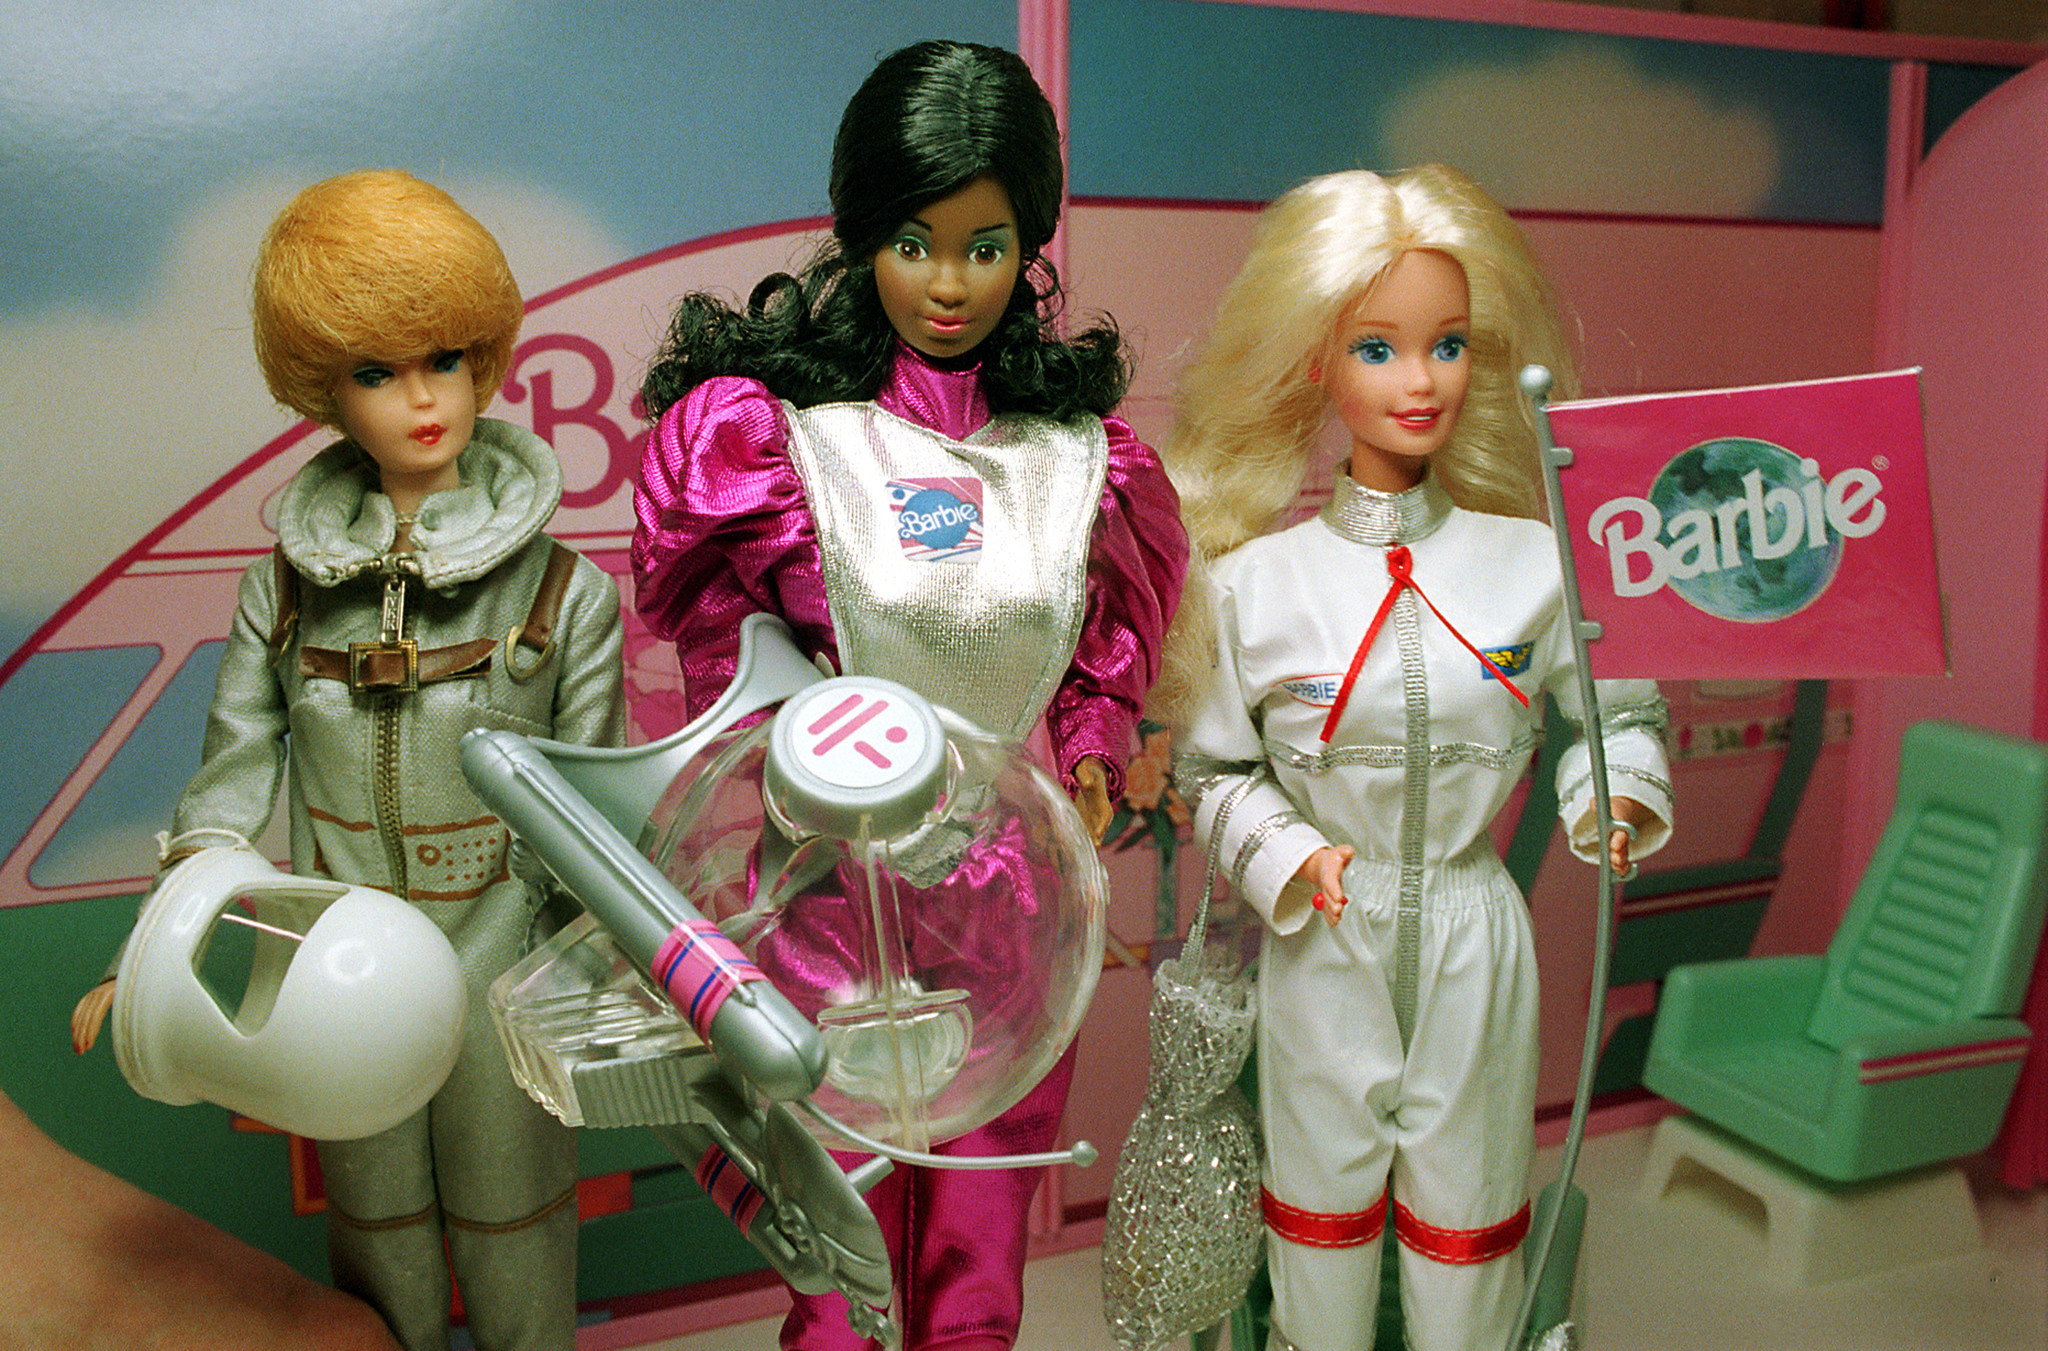 Astronaut Barbie dolls, from left, the 1960s, 1980s and 1990s, sit on display at the Smithsonian's National Air and Space Museum in Washington, D.C. on May 1, 1995. Barbie as a character is known for her many professions.